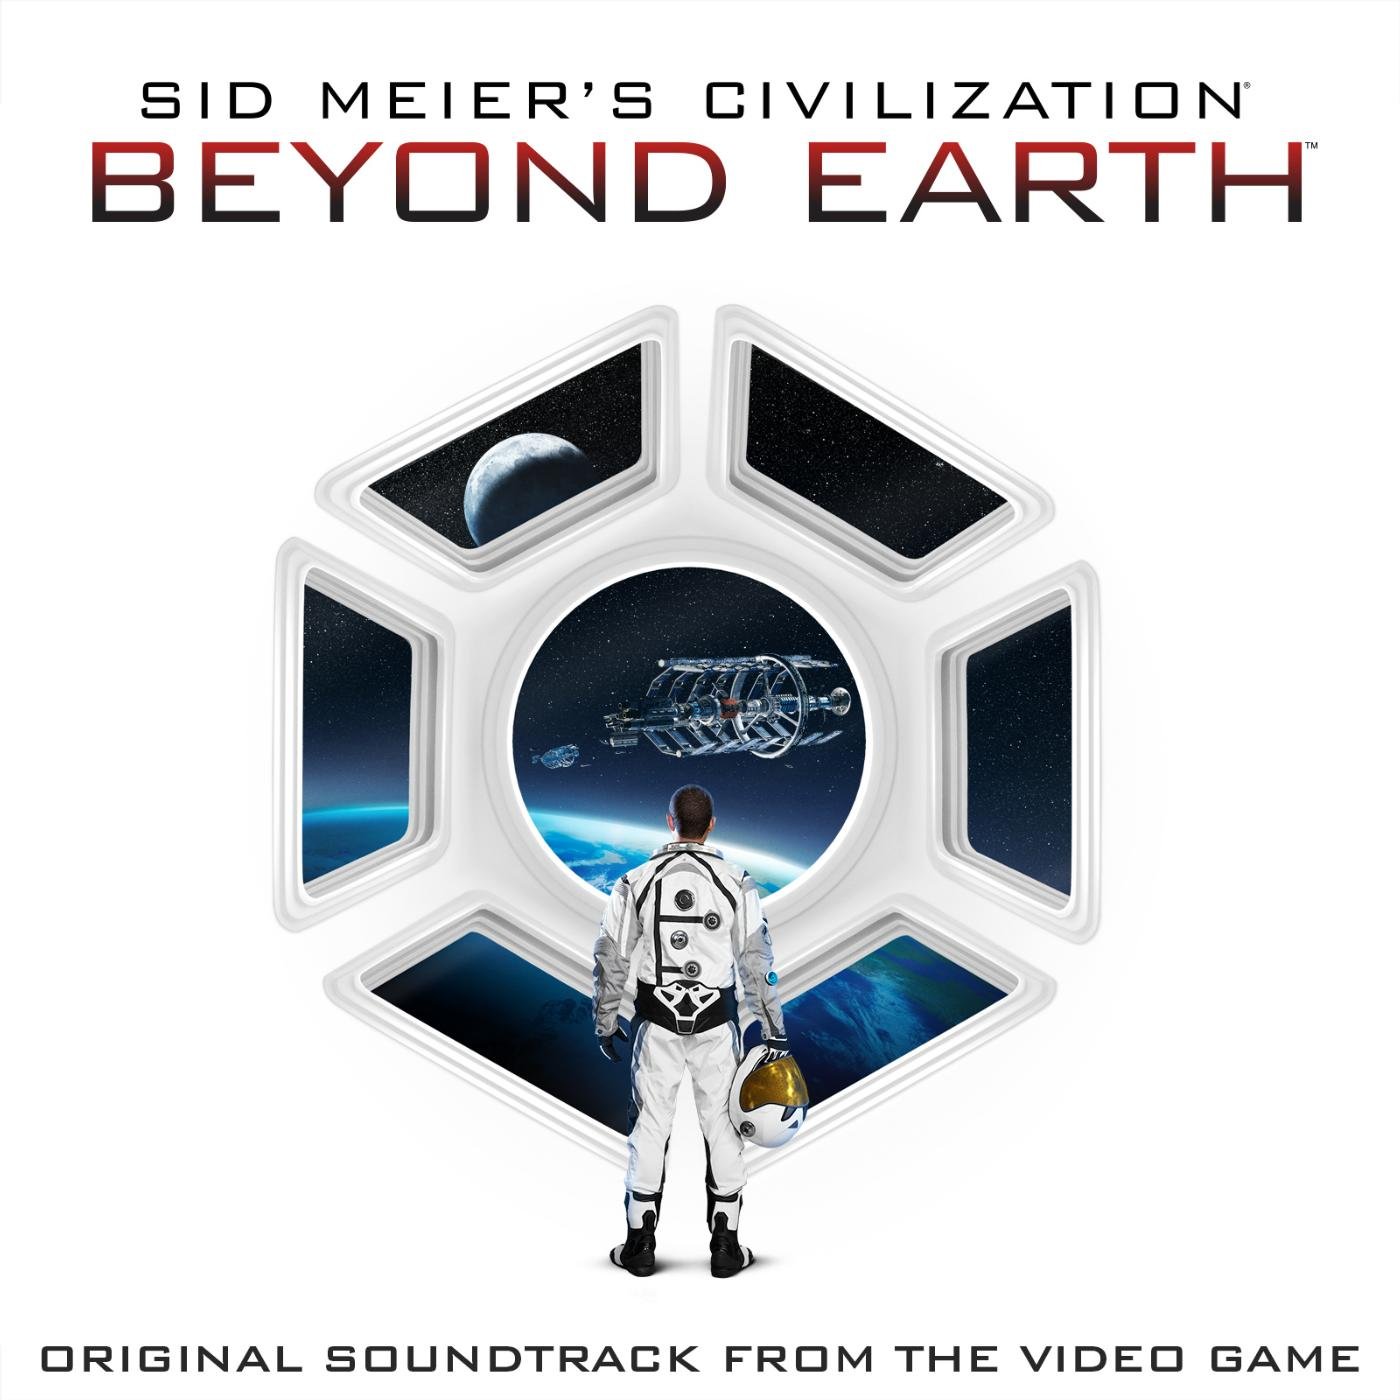 Sid_Meiers_Civilization-Beyond_Earth_Original_Soundtrack_from_the_Video_Game__Cover1400x1400.jpg